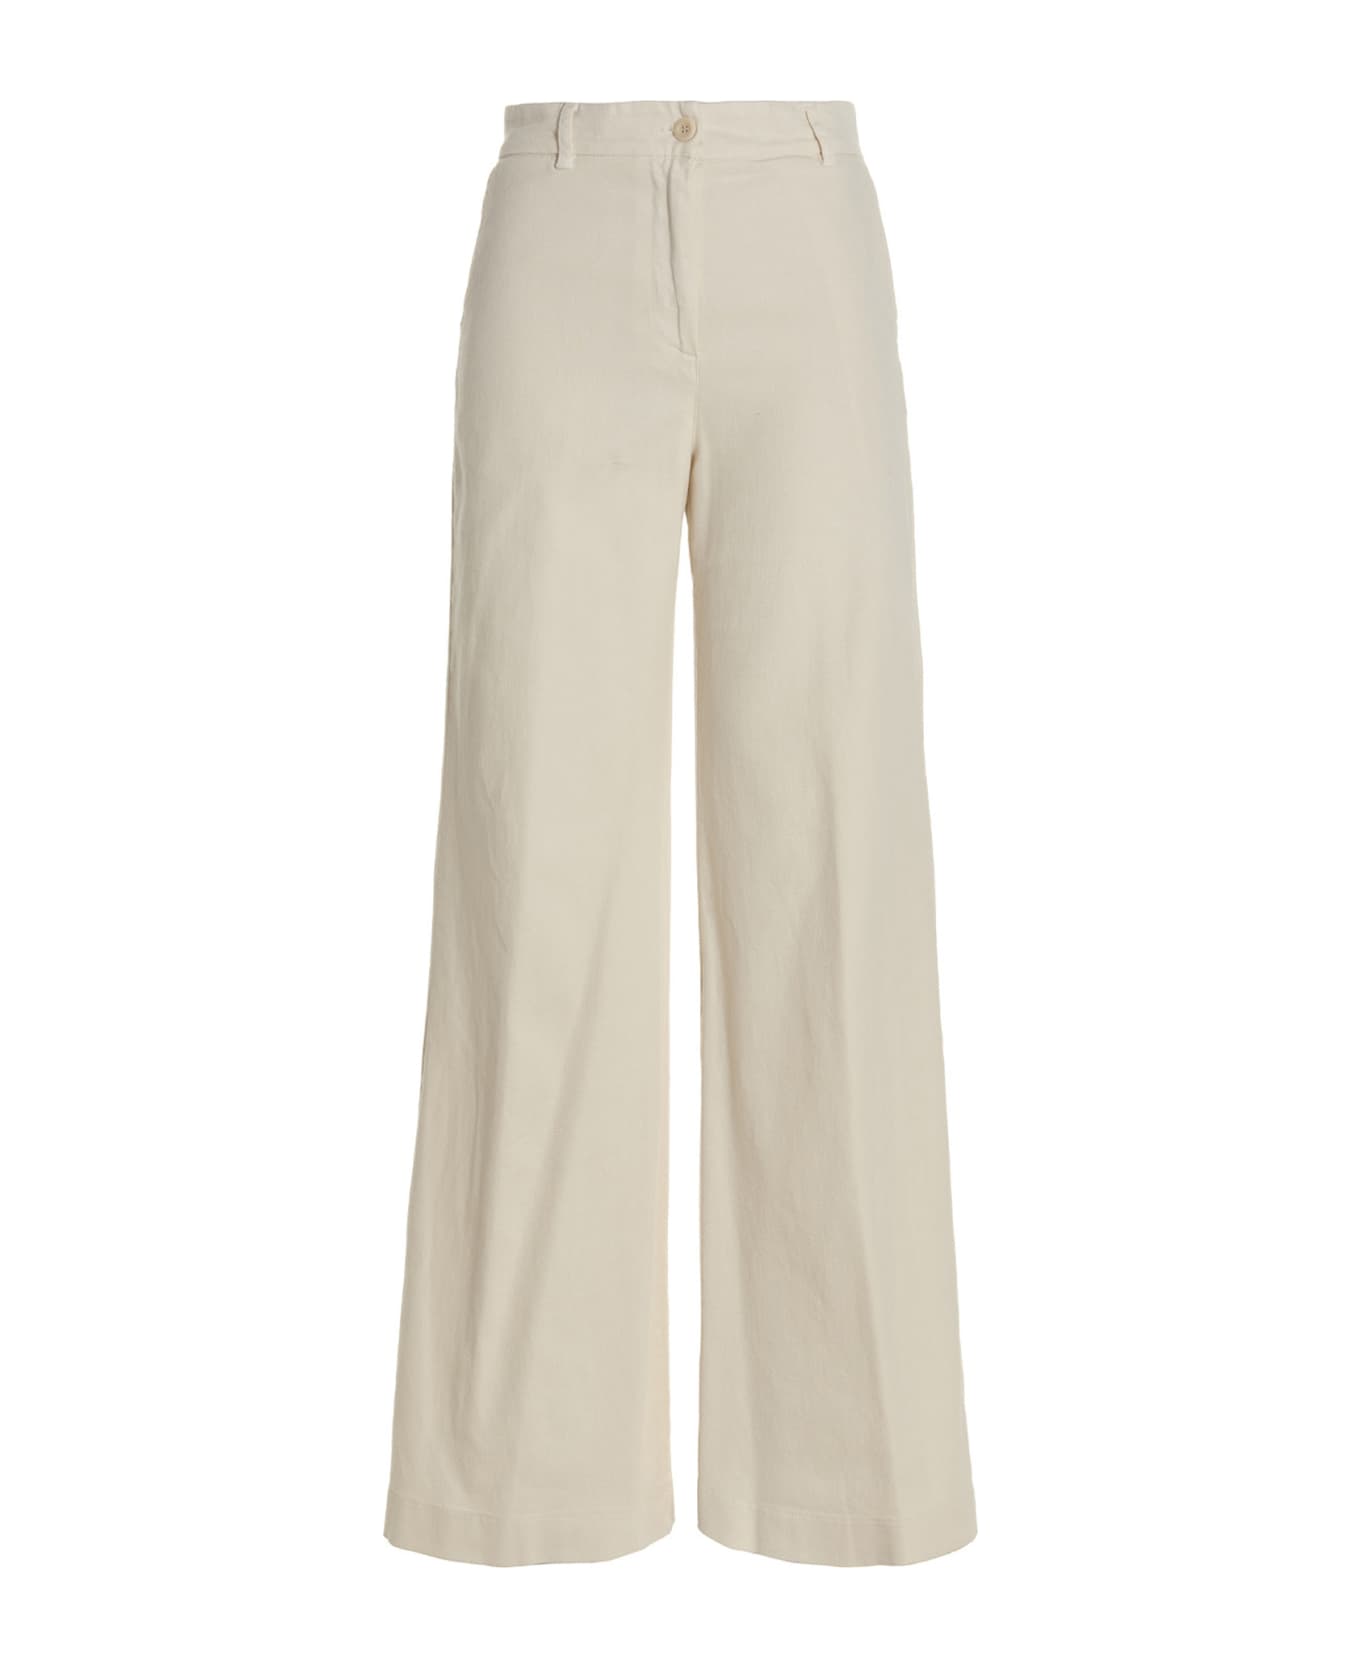 (nude) Wide Leg Jeans - White